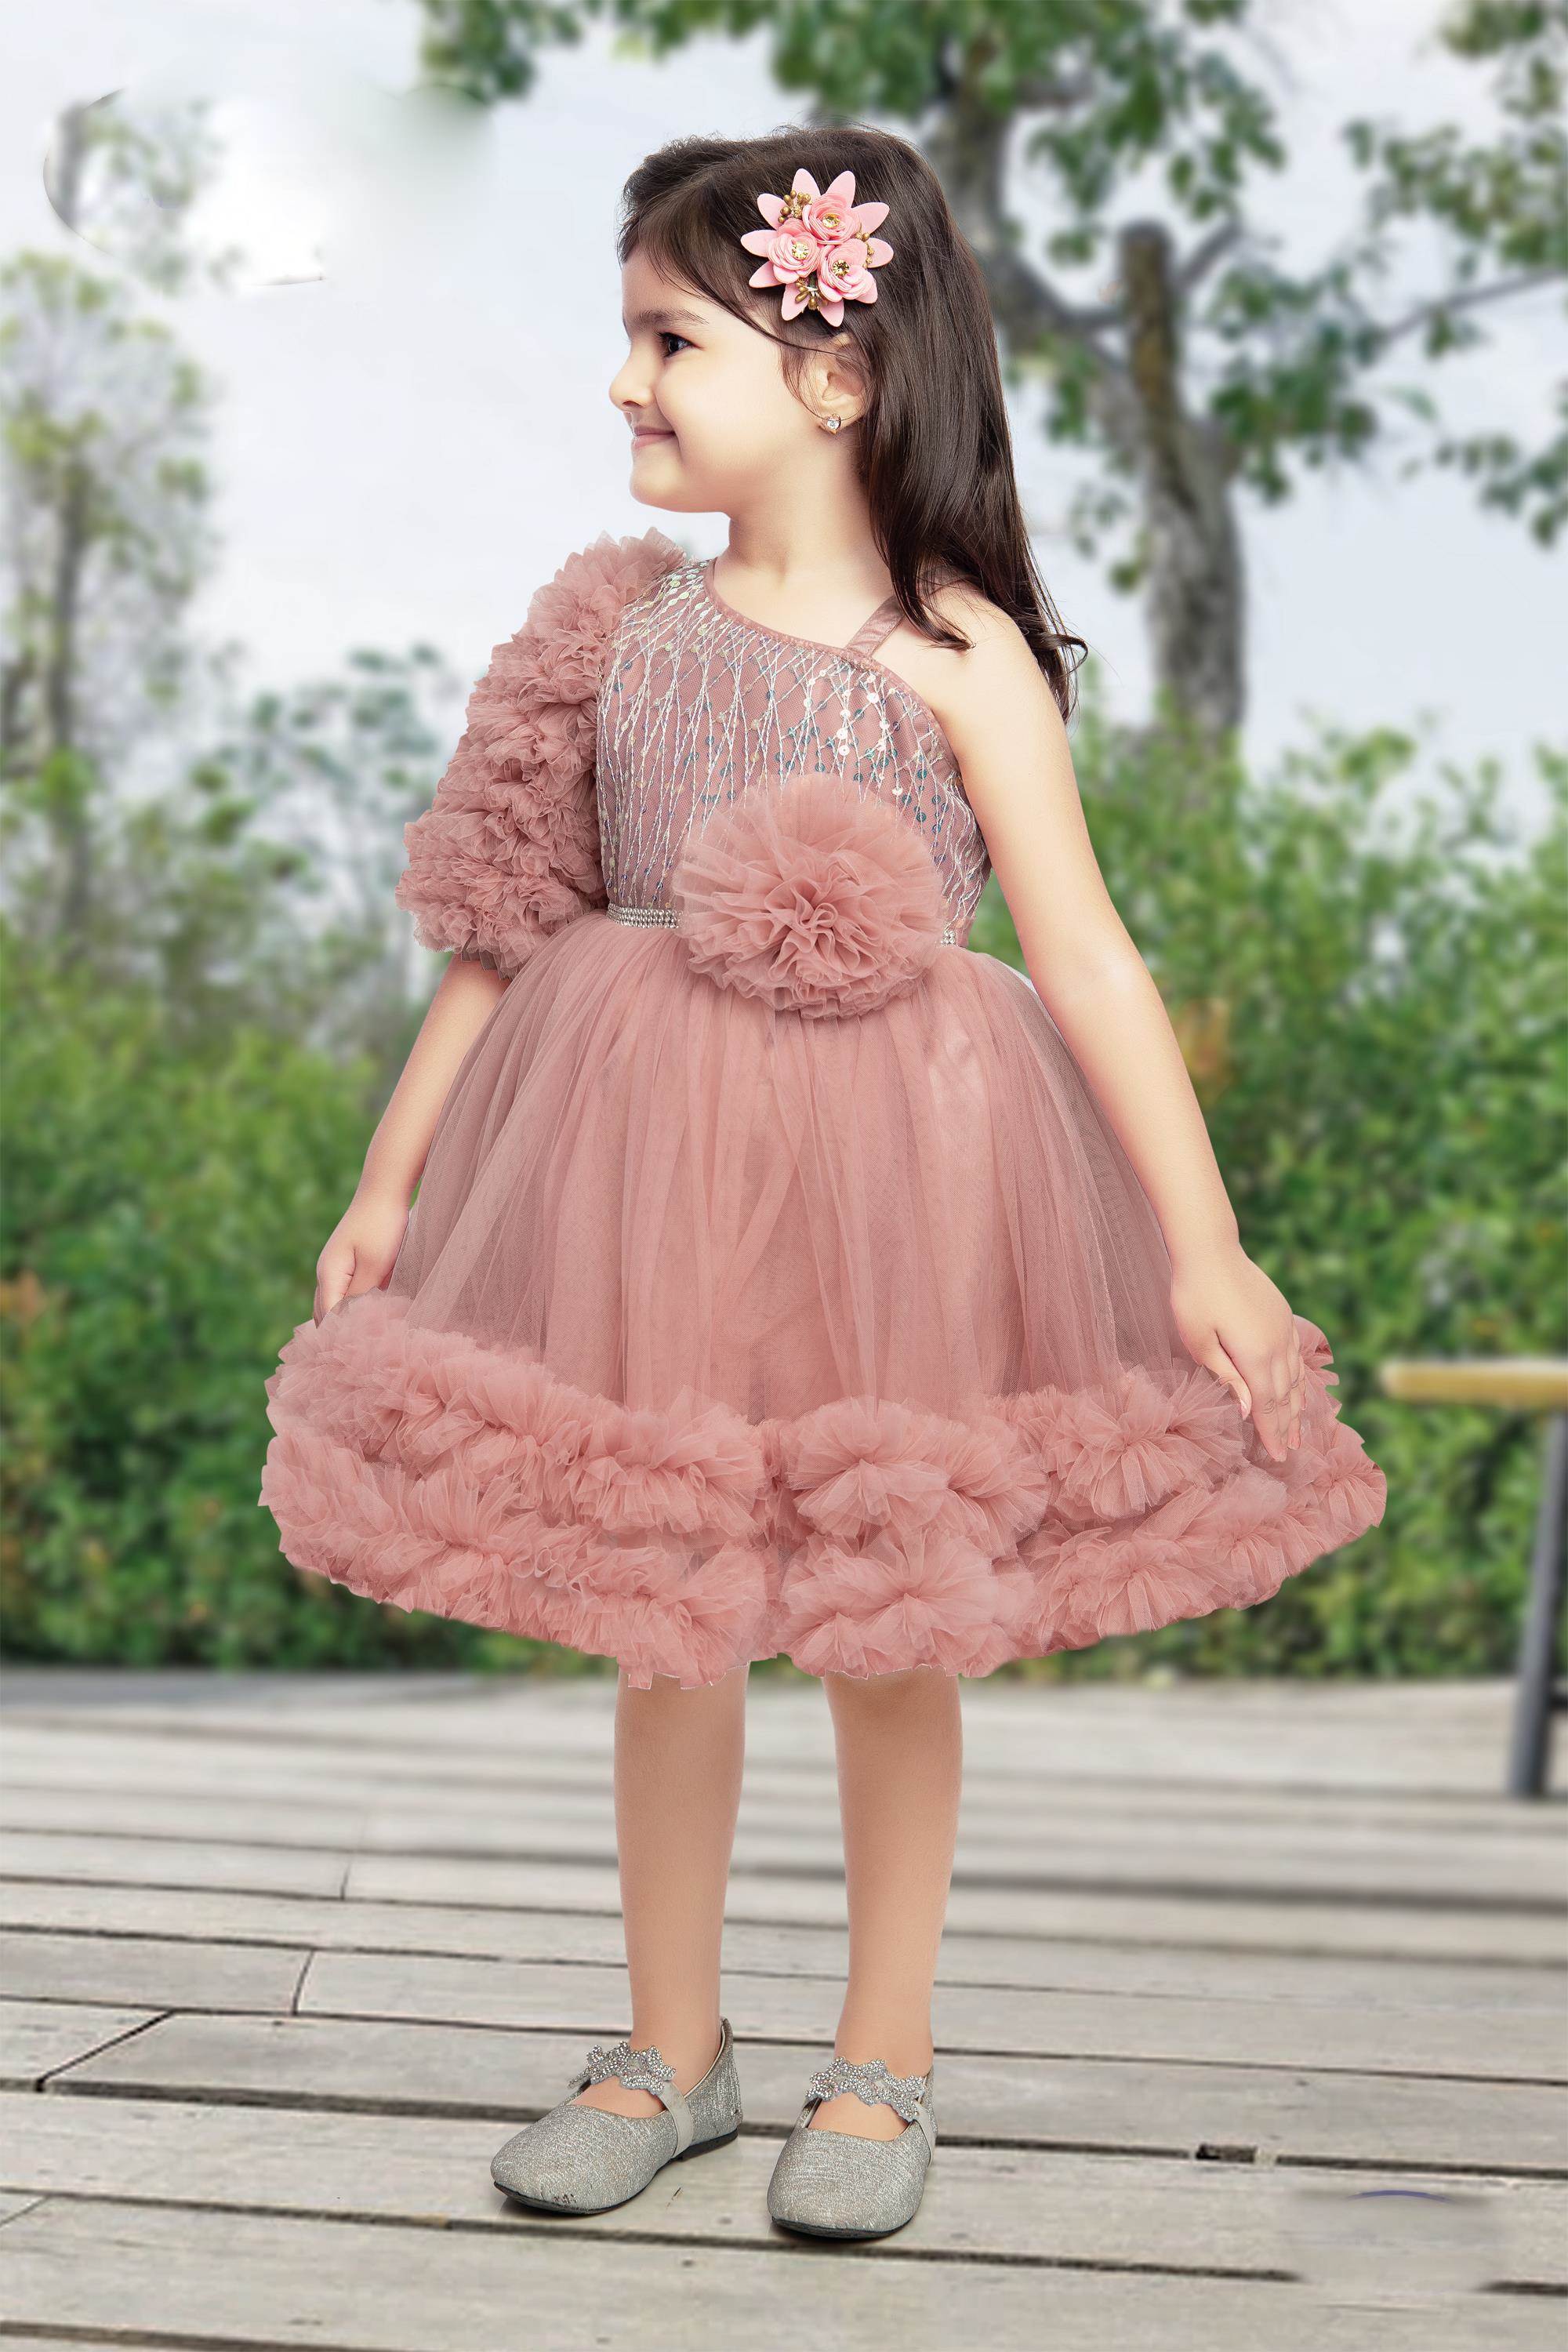 Details more than 193 party wear baby frock best